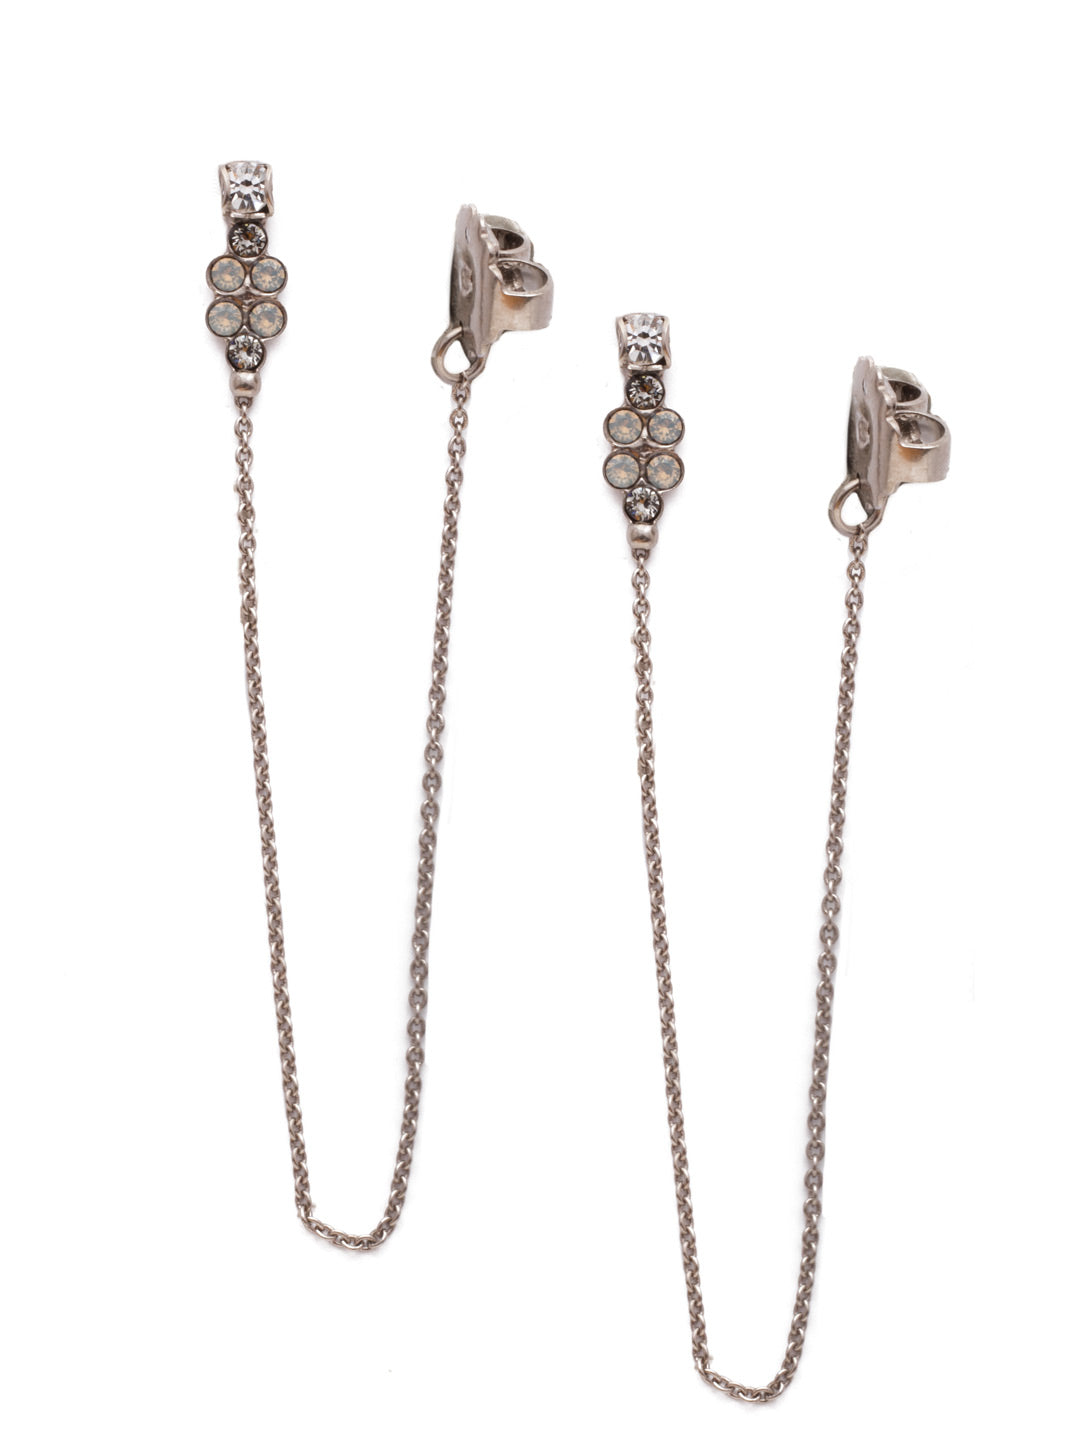 Faye Statement Earrings - EEN73ASSTC - <p>The Faye Statement Earrings are special. Start from the top and fasten on elegant crystal stones that sparkle. Then get ready for the edgy dangle of a fun metal strand. They're ready for their night out. From Sorrelli's Storm Clouds collection in our Antique Silver-tone finish.</p>